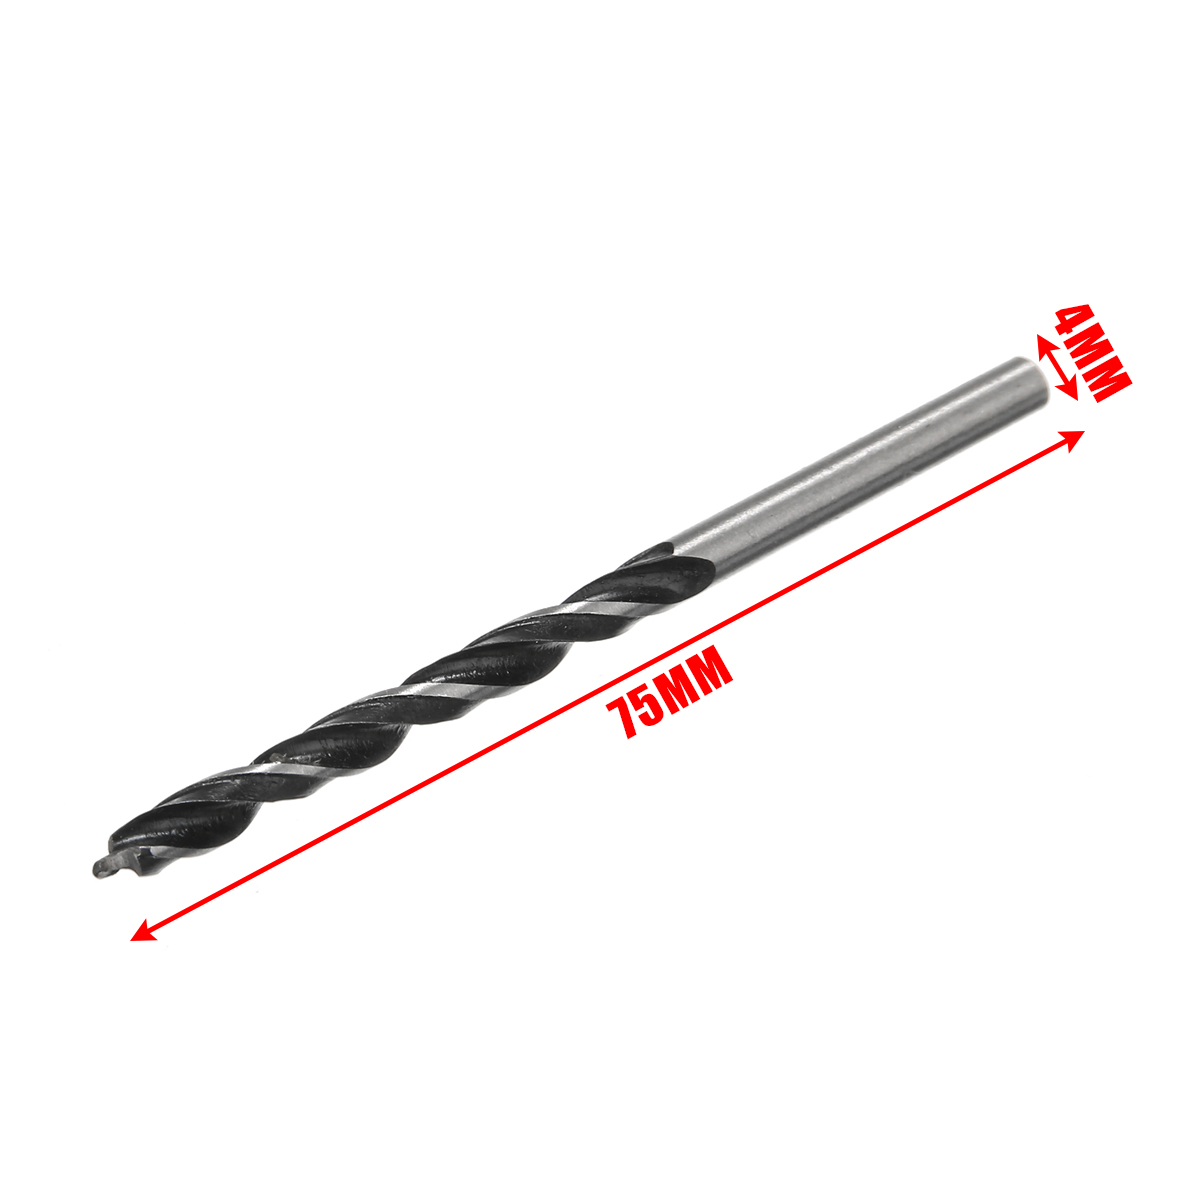 10pcs 75mm Length Woodworking Drills with Center Point 4mm Diam Twist Drill Bits for Drilling Wood